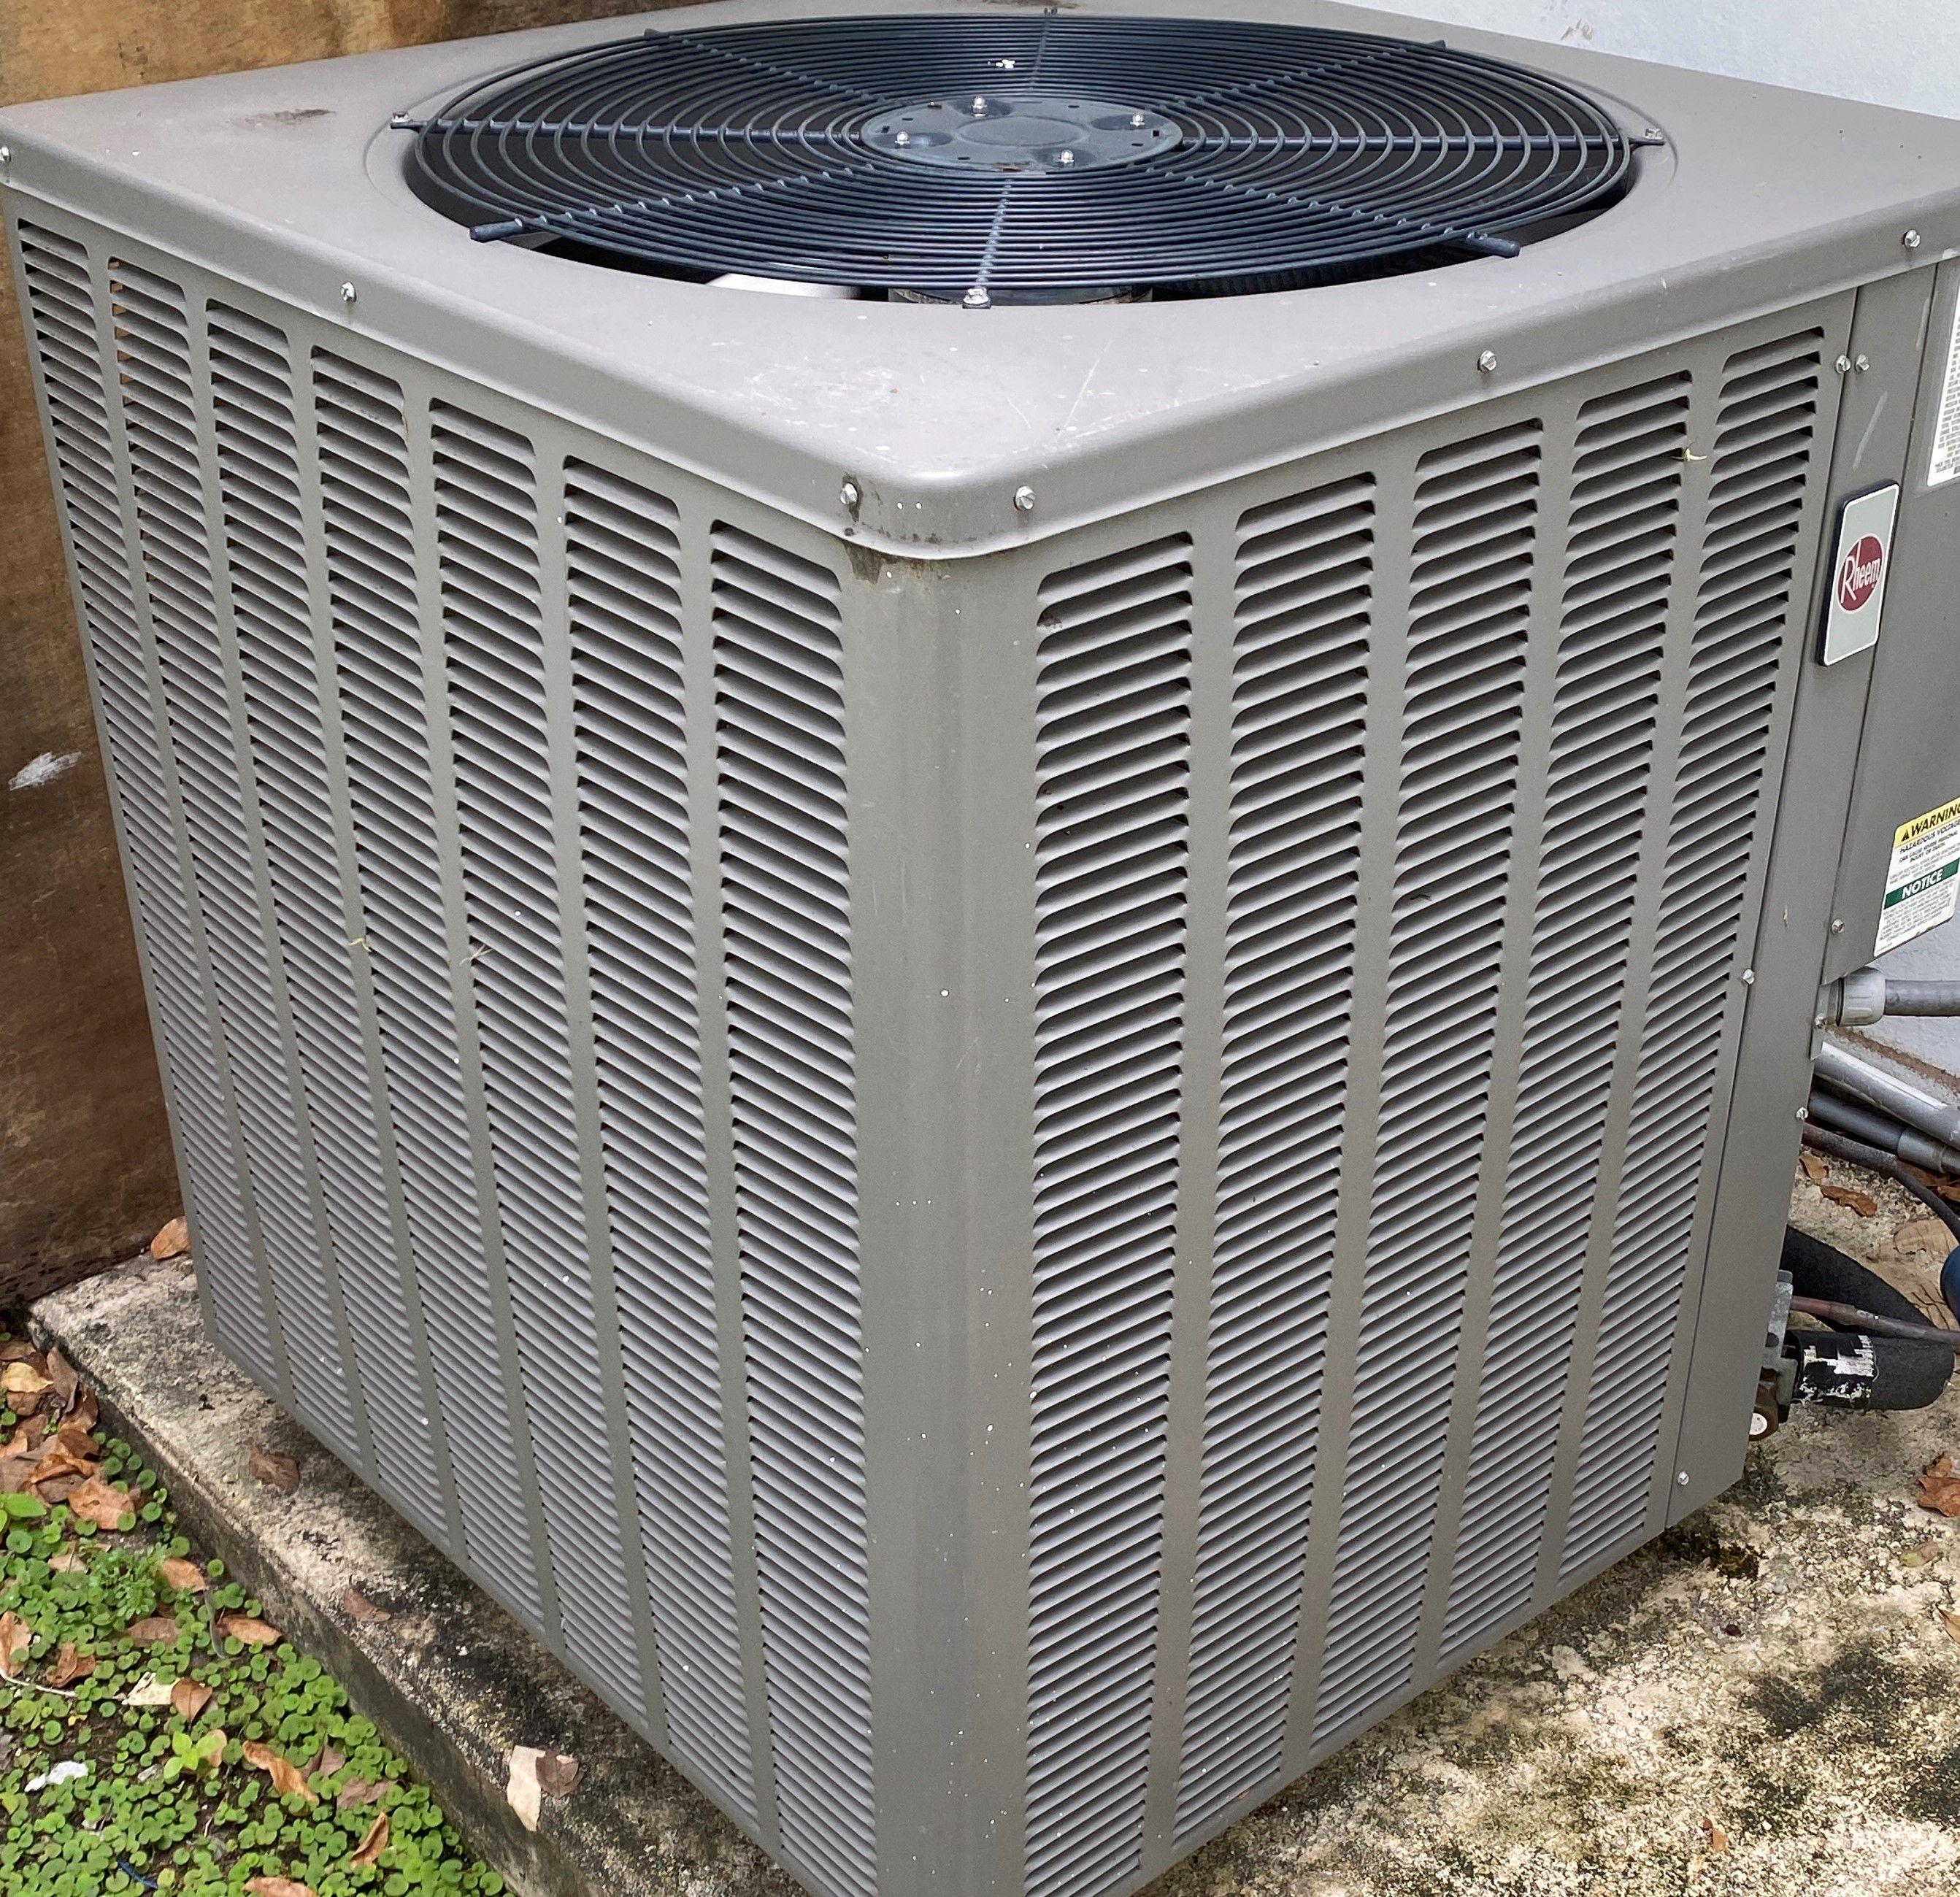 Rheem Late Model 5 Ton Air Conditioning System, With RHLL Series 5 Multi-Position High Efficiency Ai